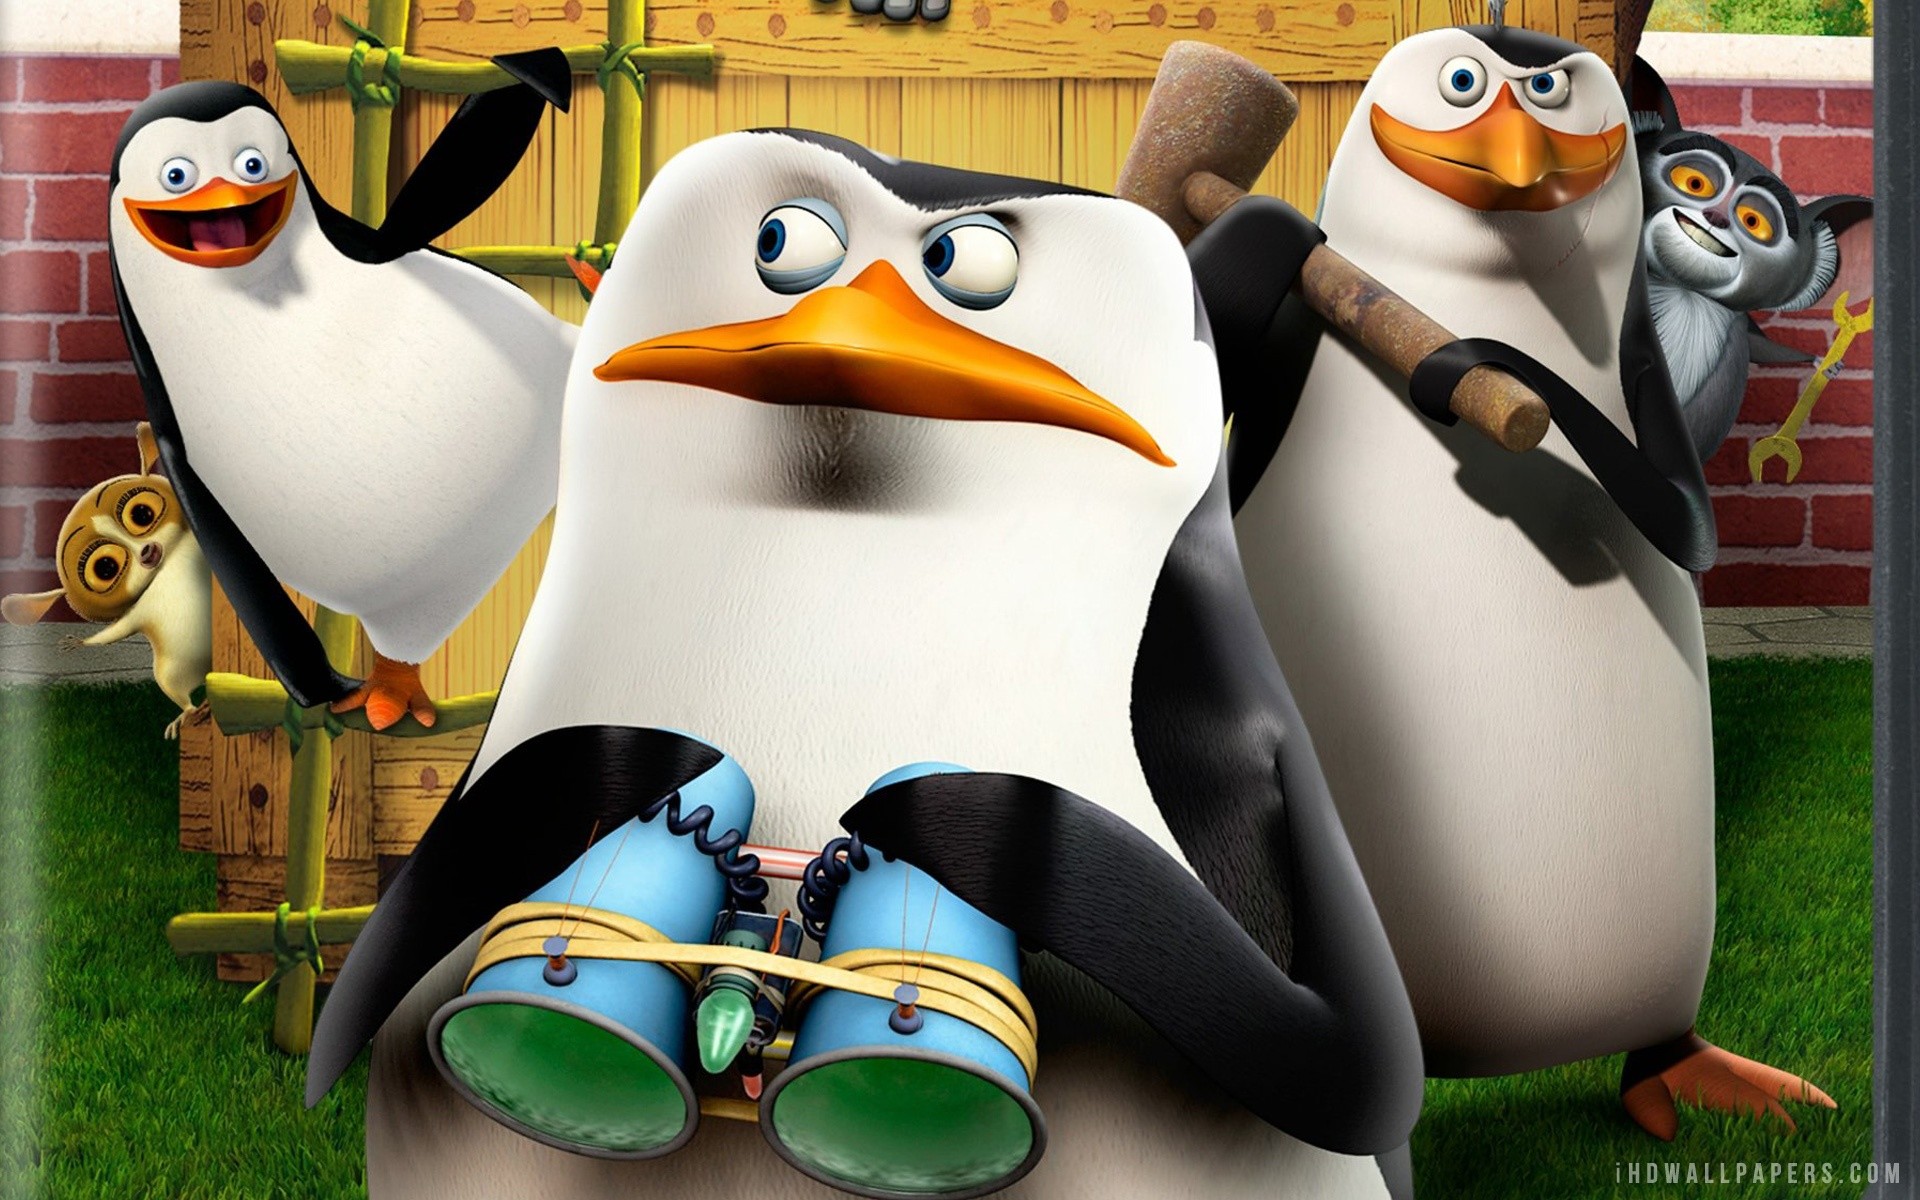 Is Penguins of Madagascar canon?